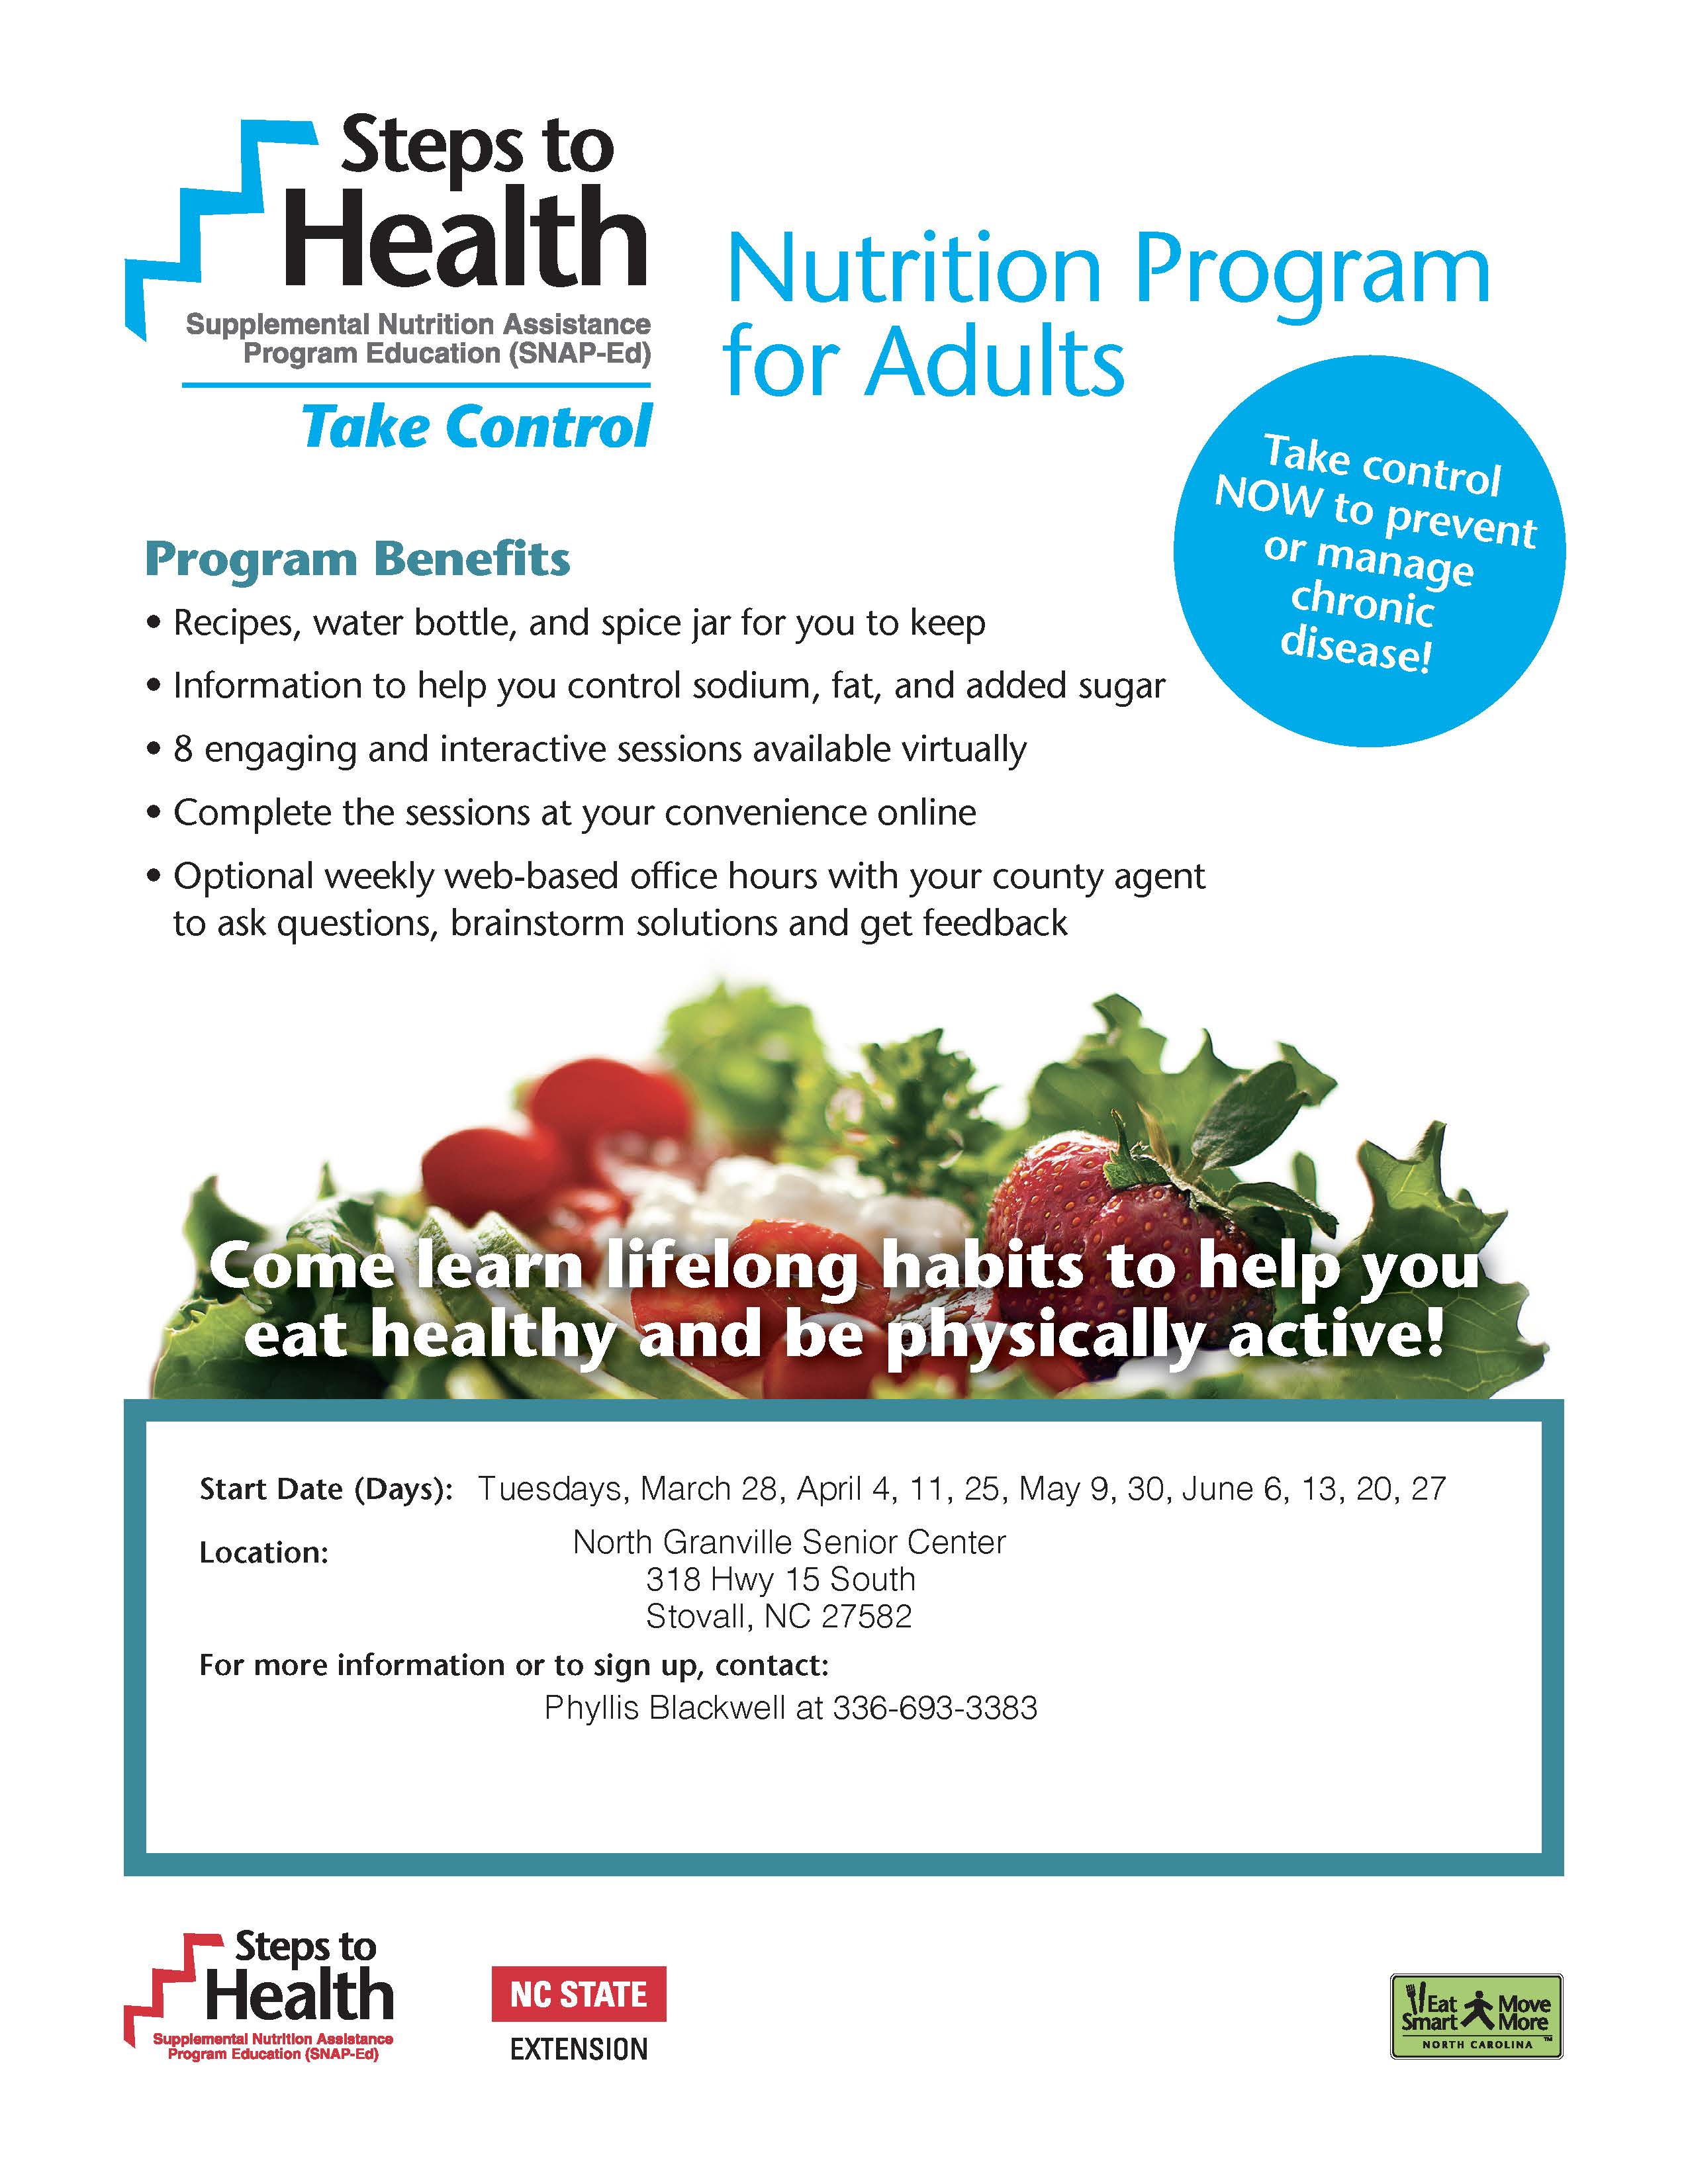 Nutrition program for adults.